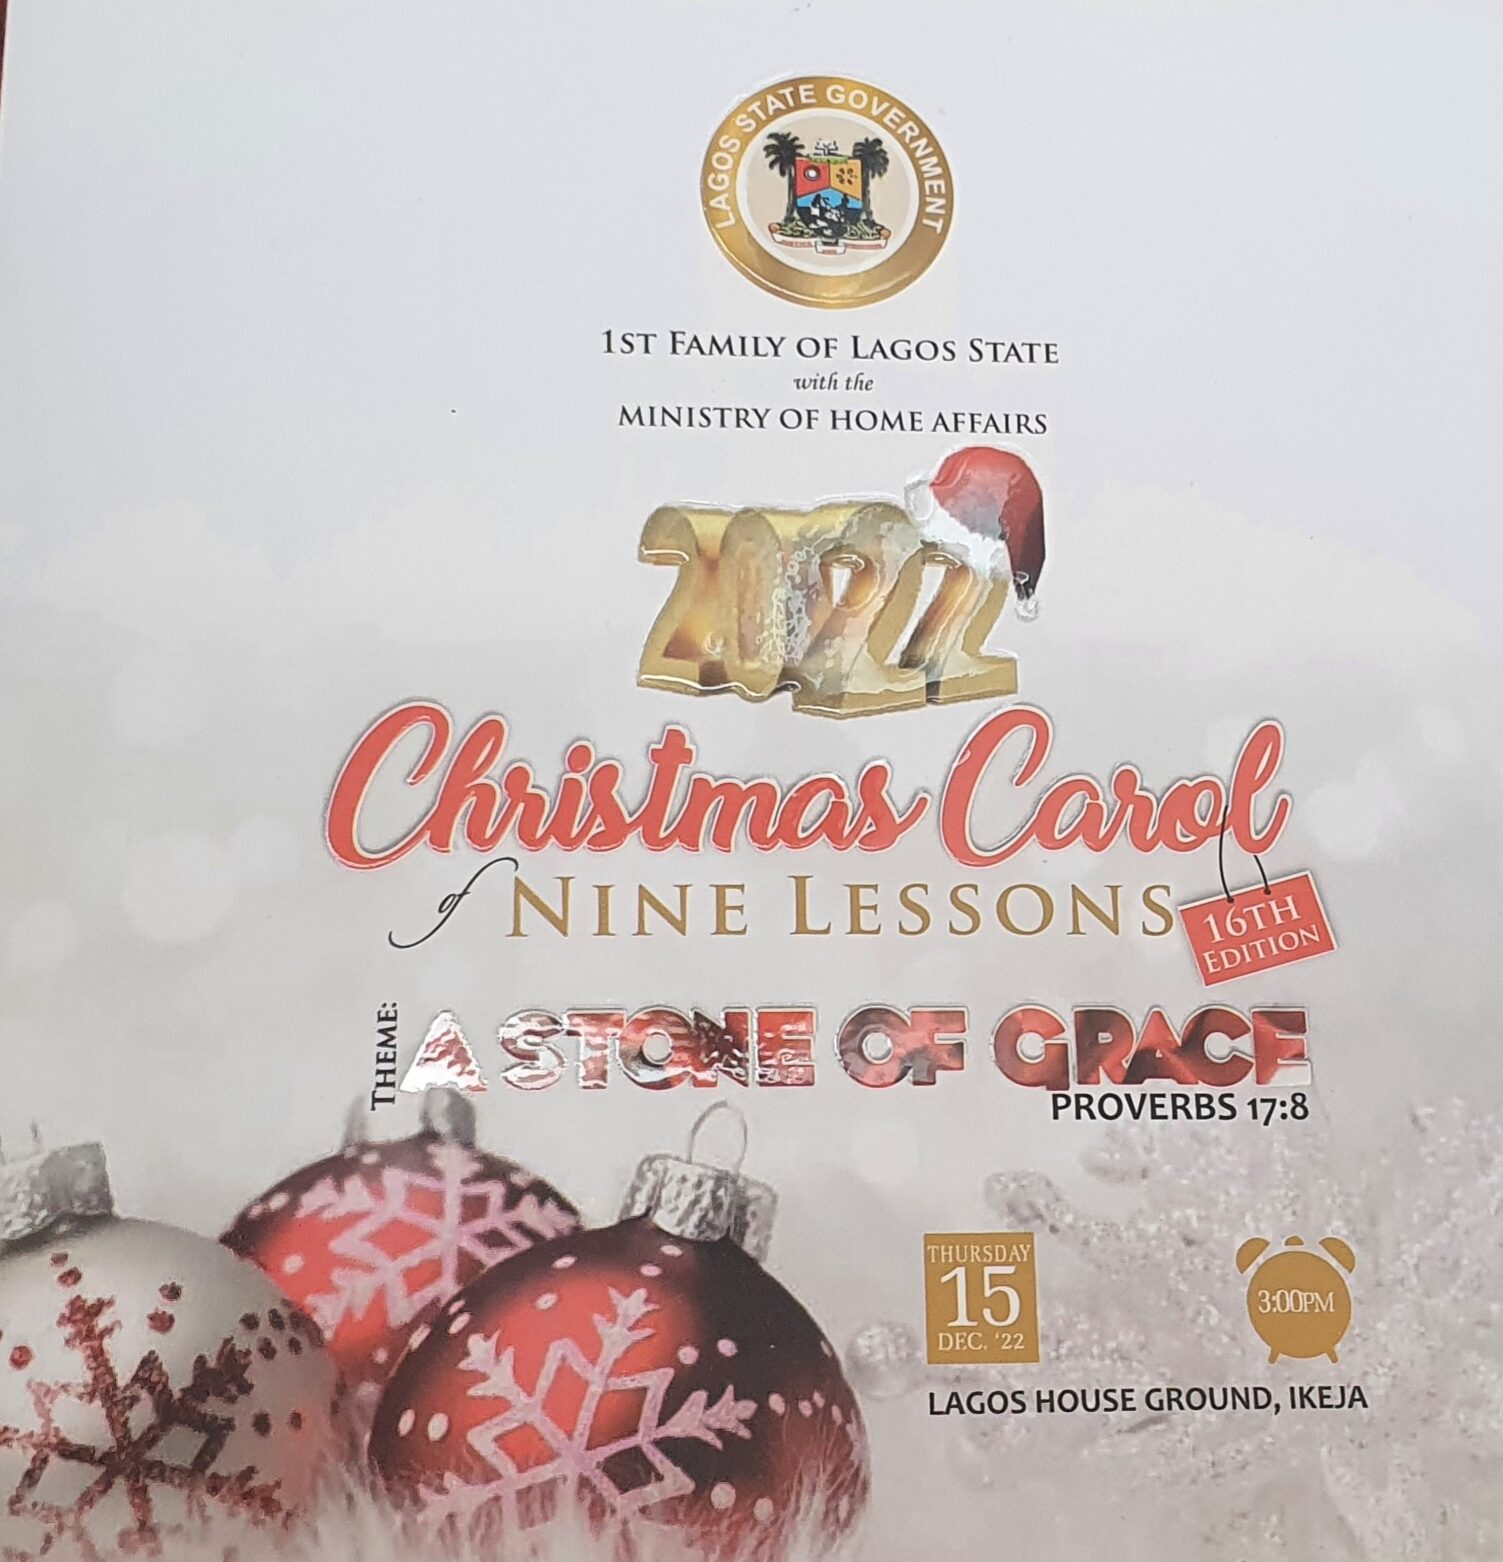 Jtah Foundation at The Christmas Carol of Nine Lessons Hosted By The First Family of Lagos State